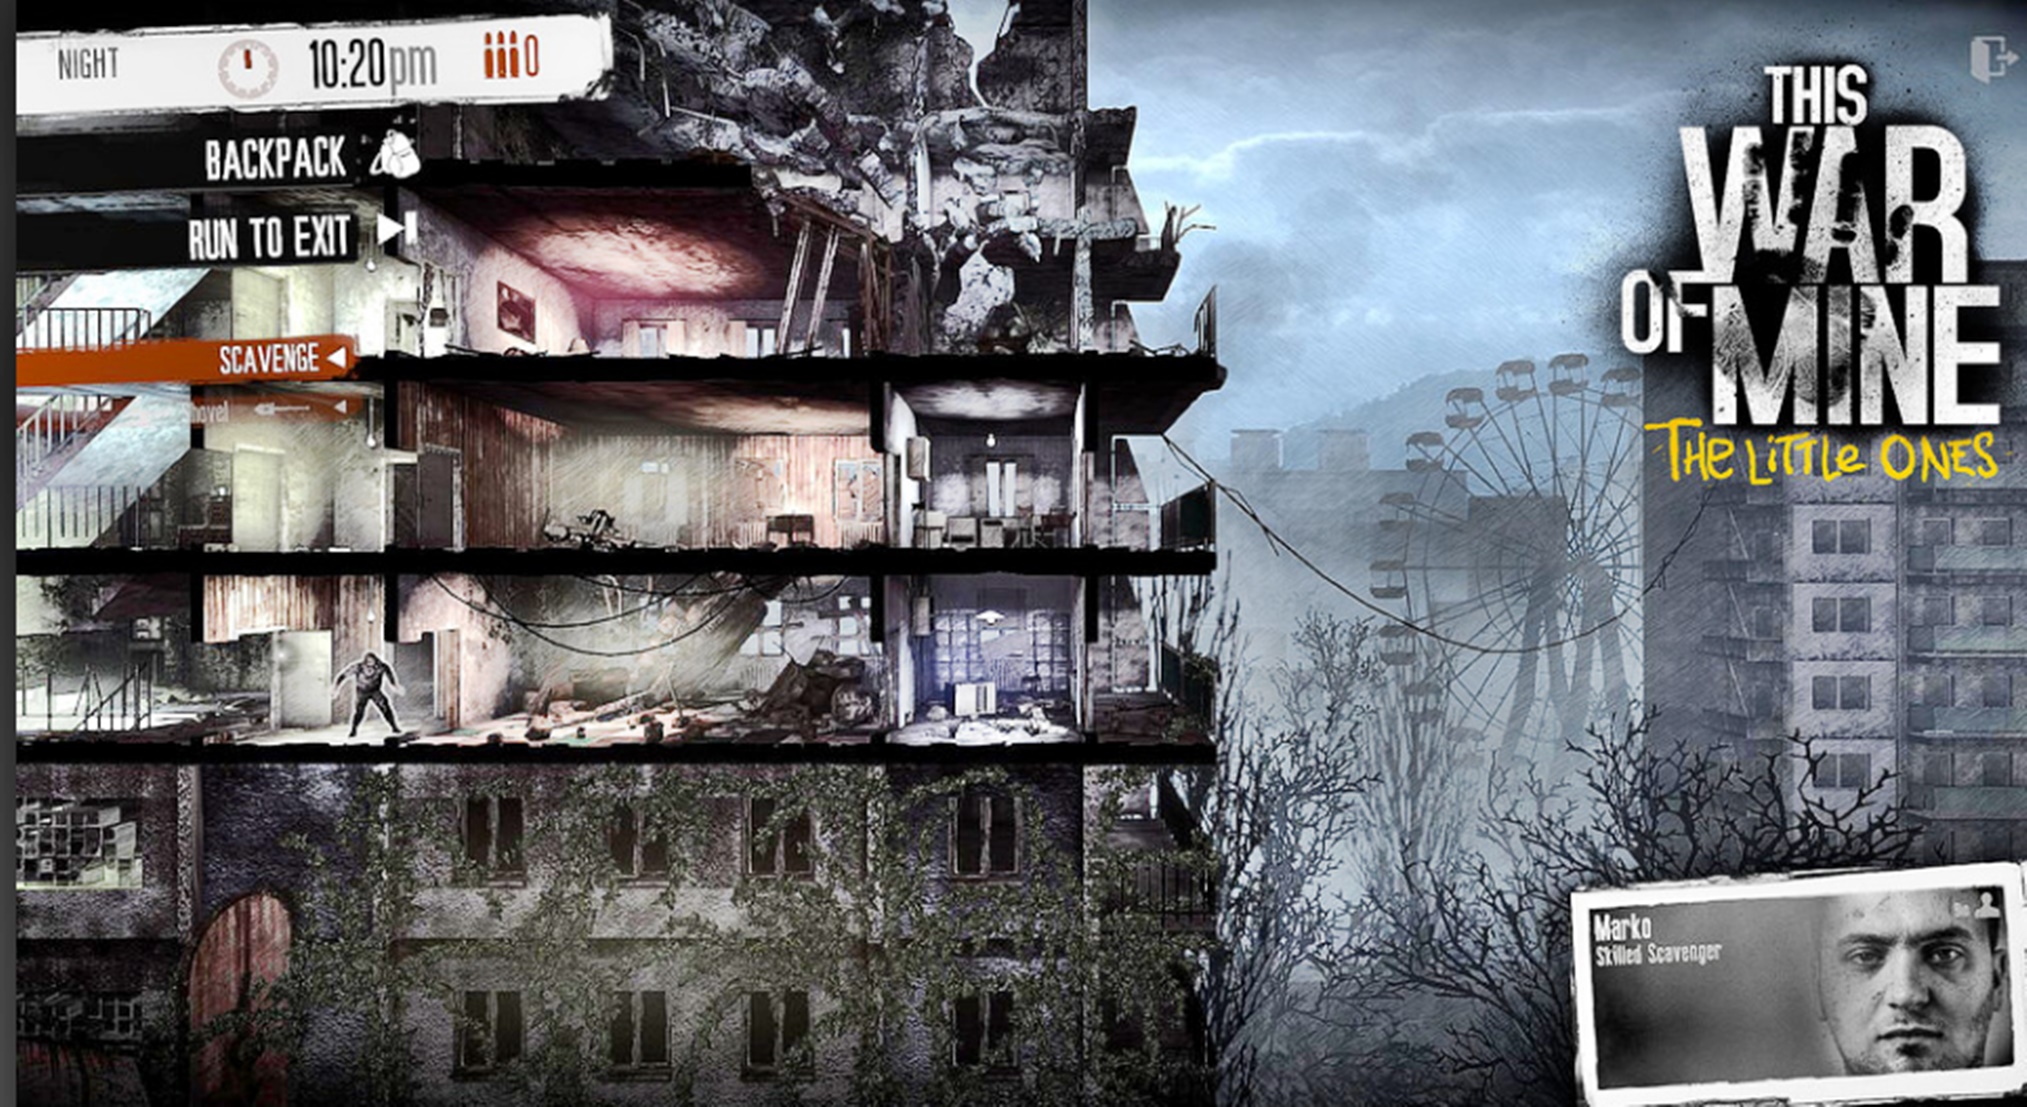 download free this war of mine the little ones